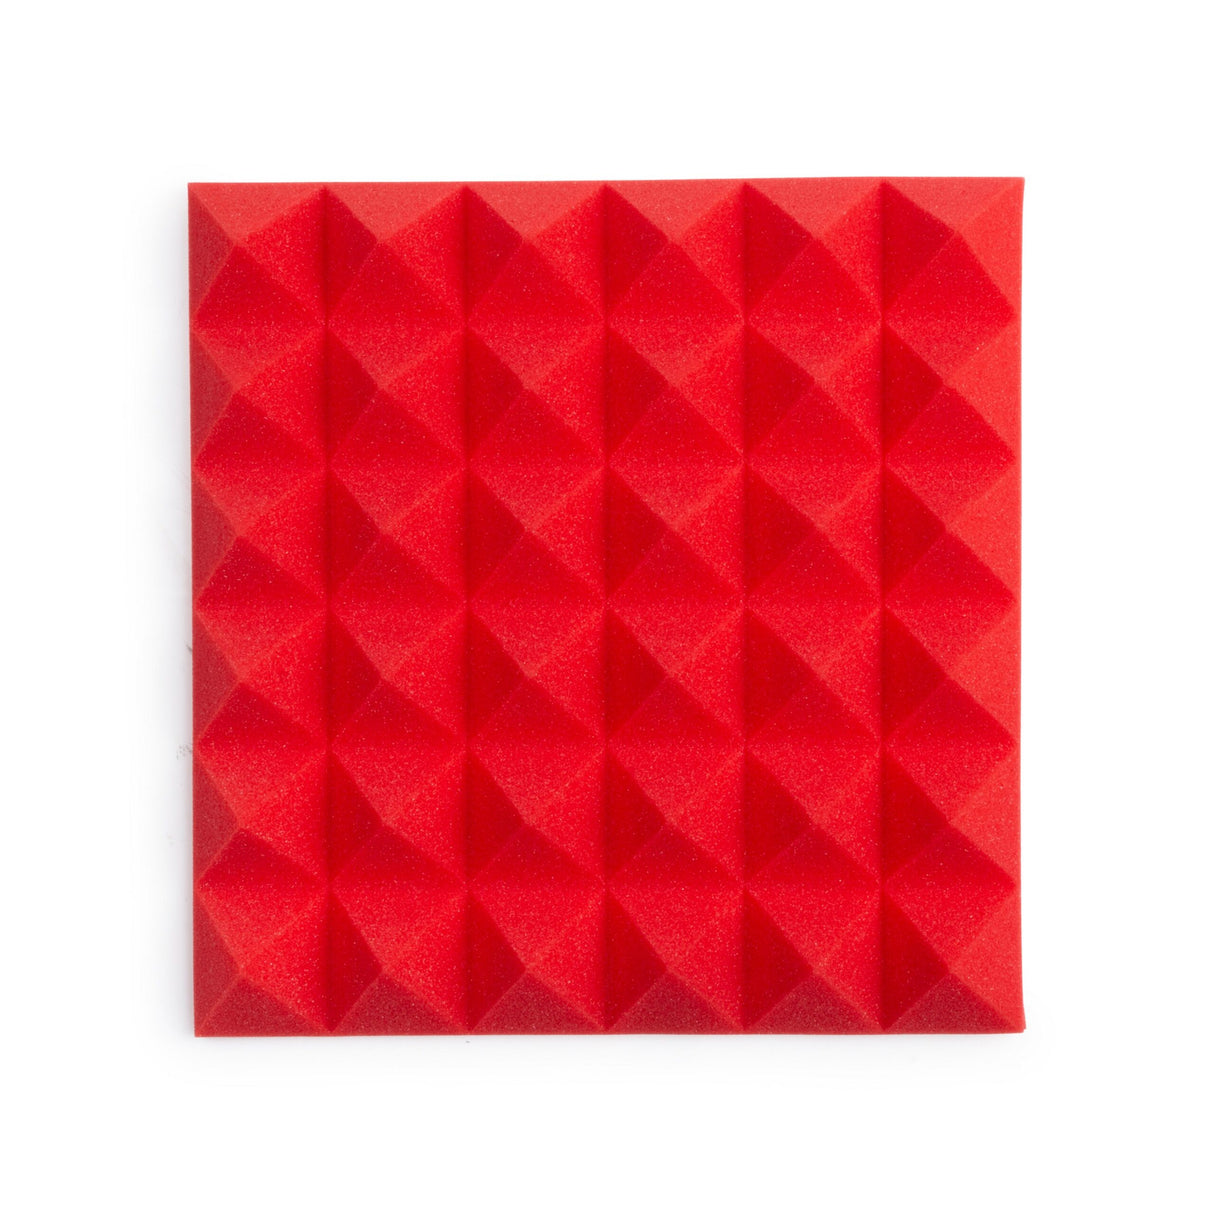 Gator GFW-ACPNL1212PRED-4PK 12 x 12-Inch Acoustic Pyramid Panel, Red 4-Pack